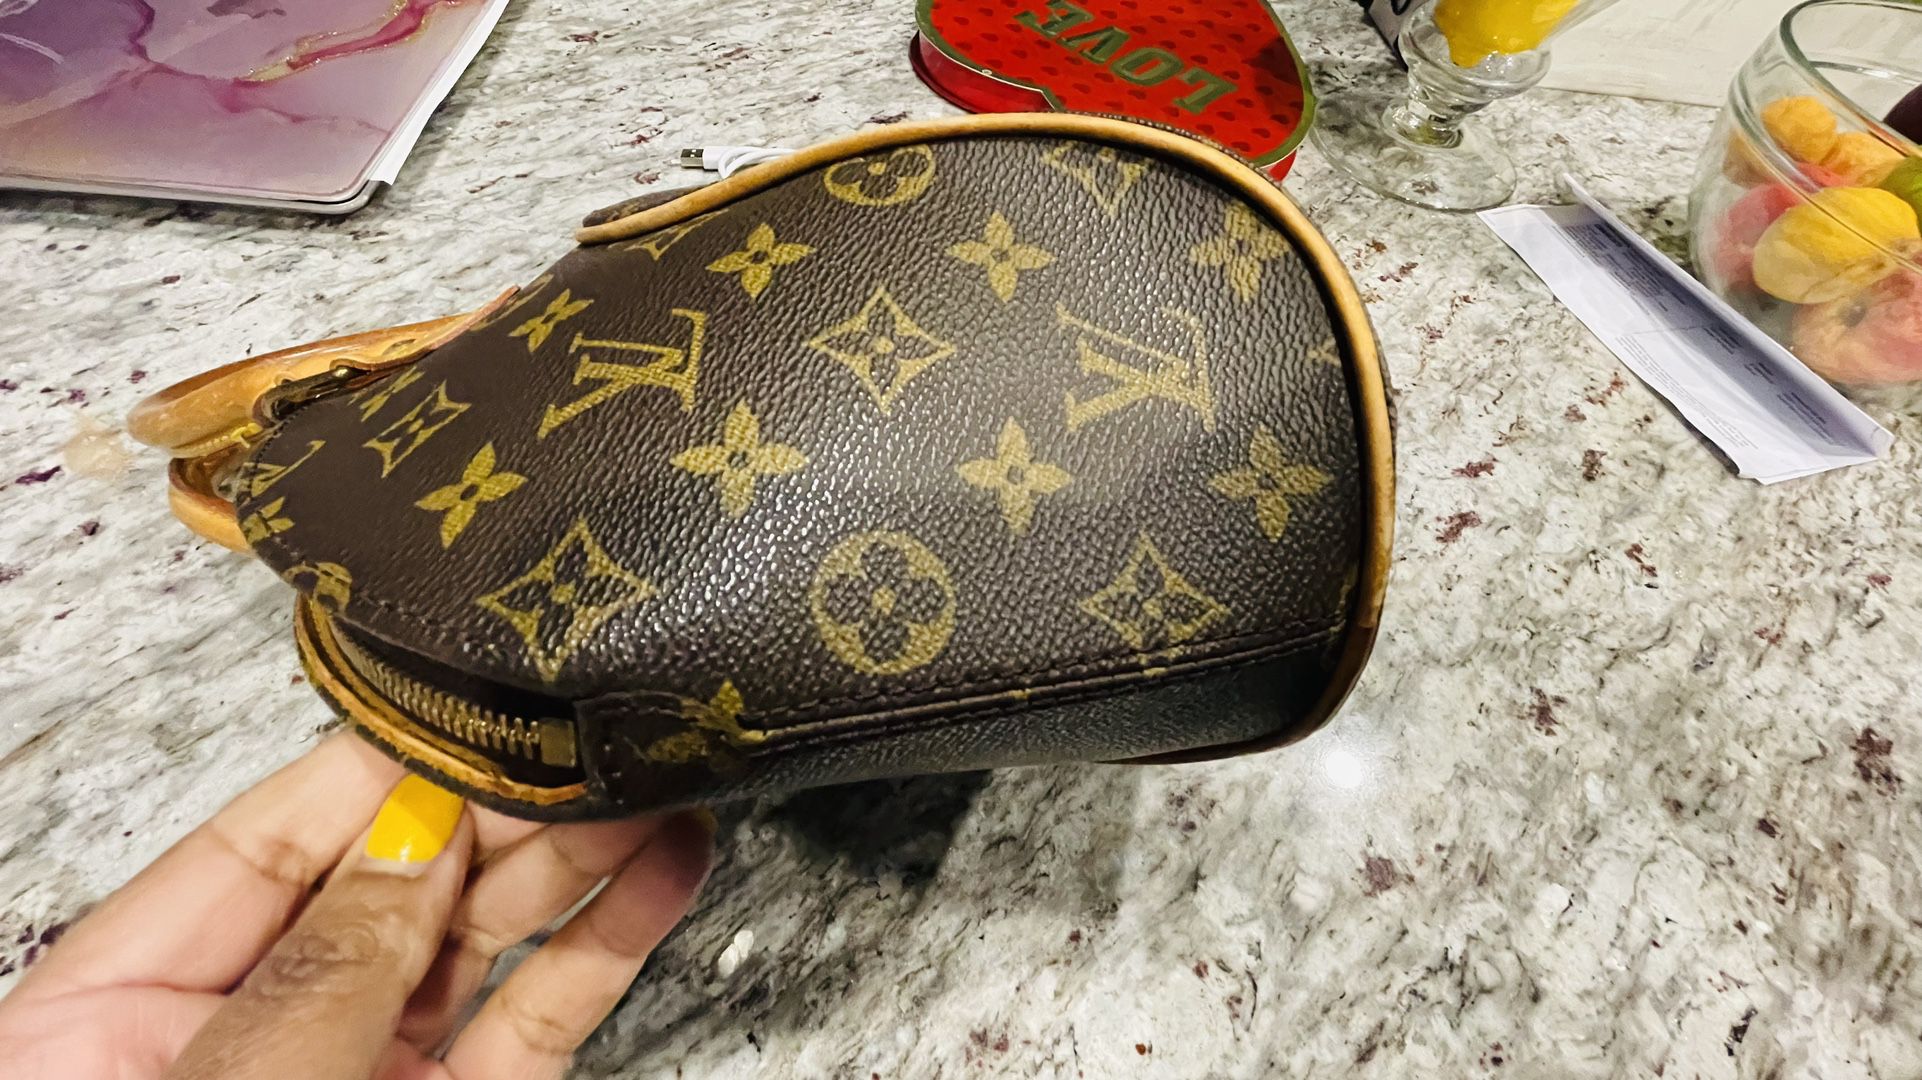 Authentic Louis Vuitton for Sale in Mesquite, TX - OfferUp